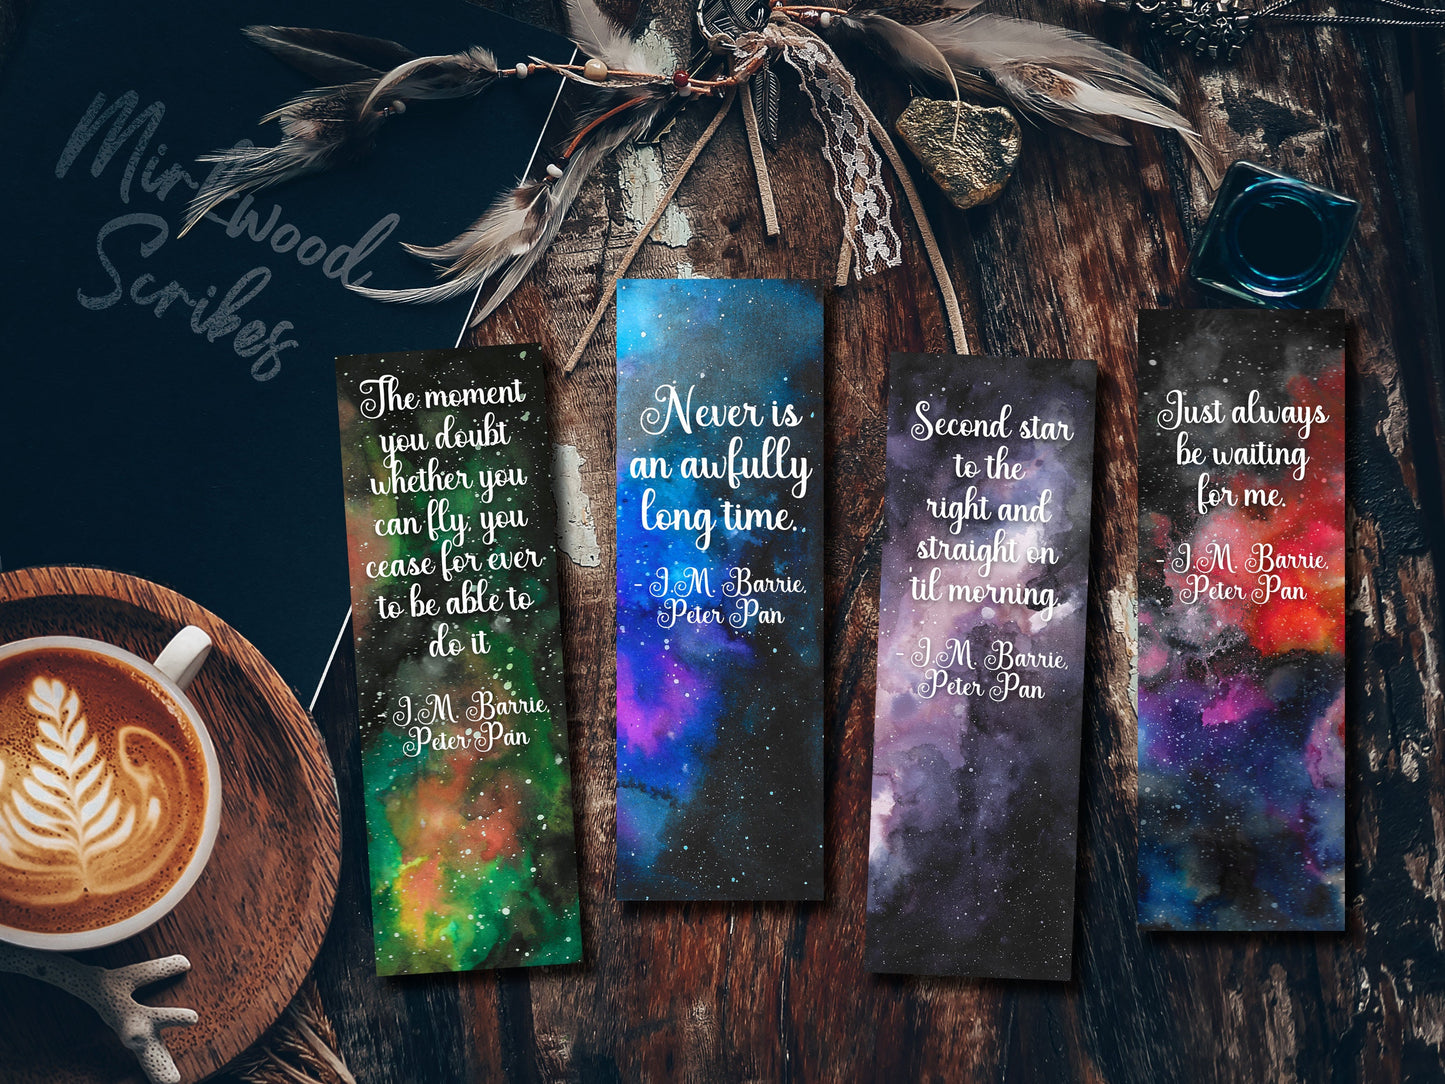 Peter Pan Watercolor Bookmark, Second Star to the Right